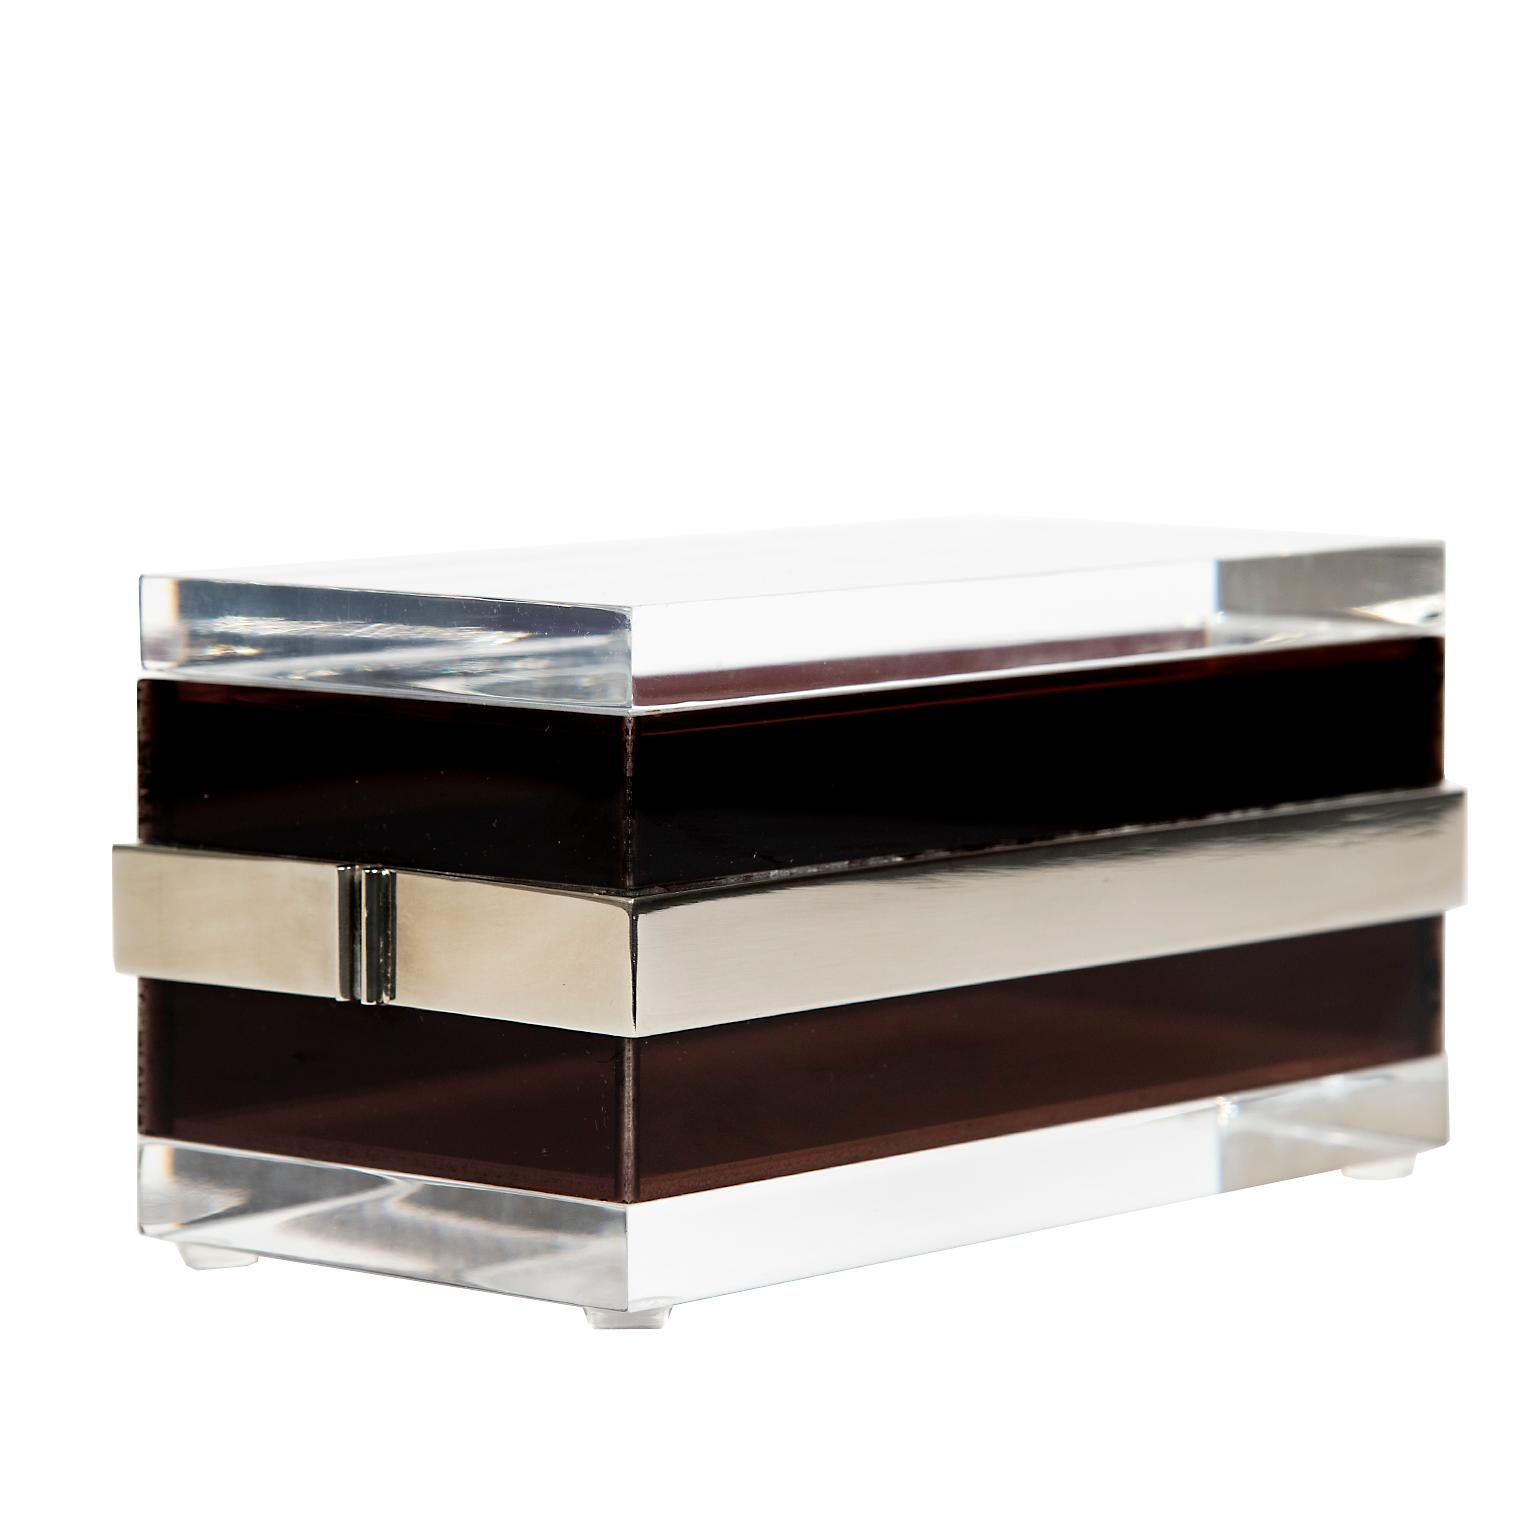 Late 20th Century Lucite and Steel Box in the Style of Gabriella Crespi, Italy, 1970